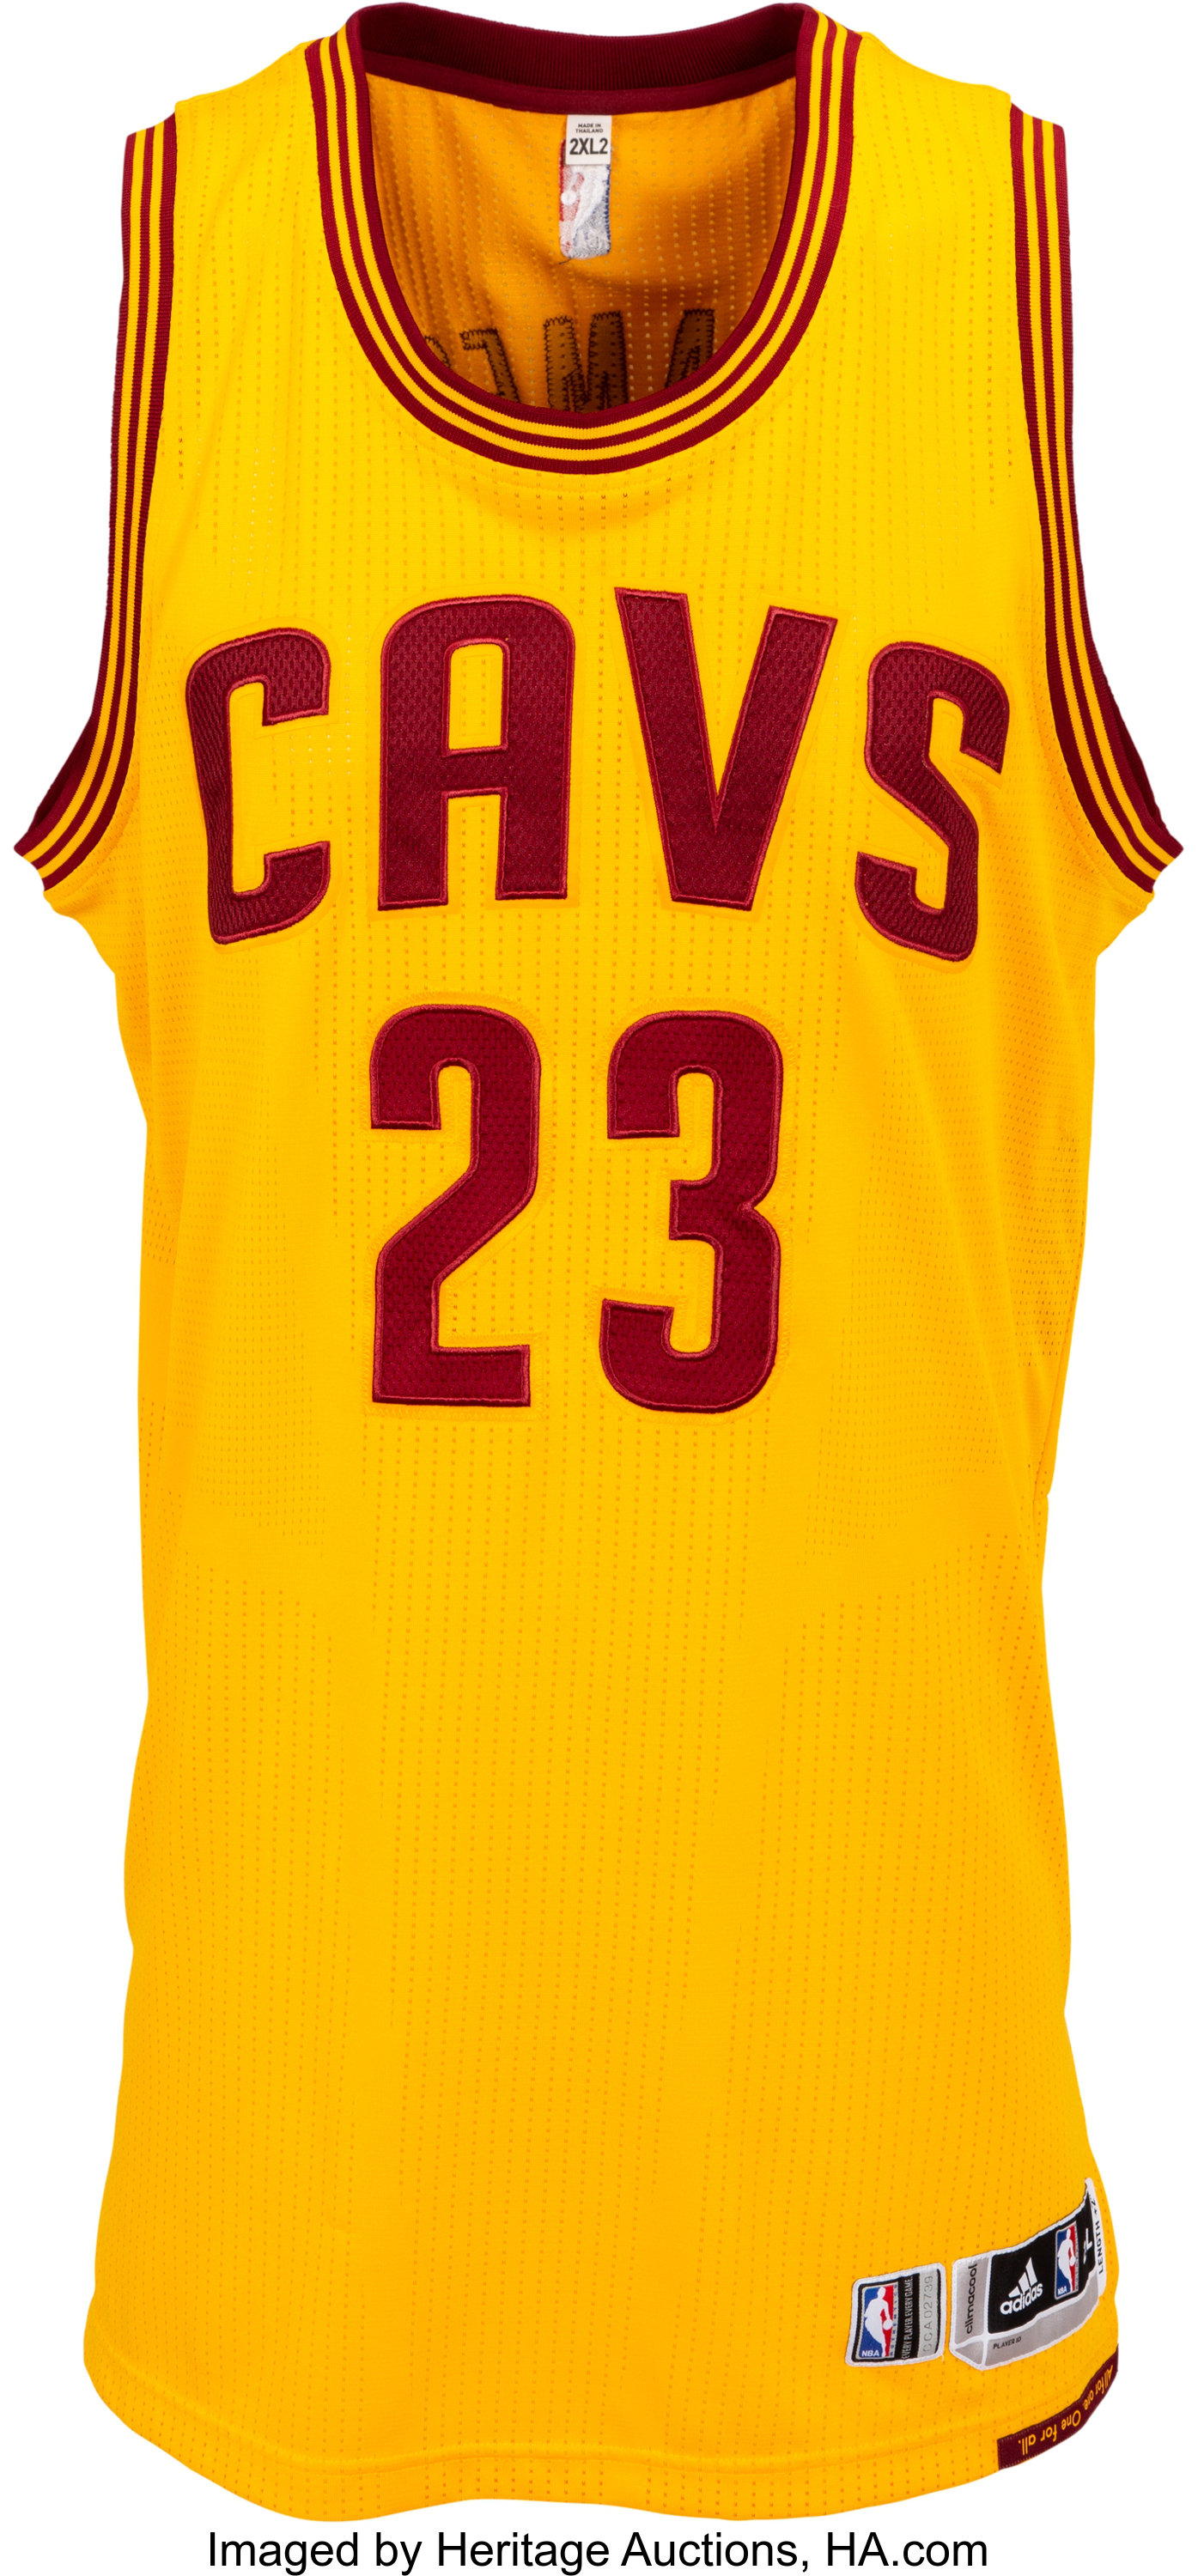 2014-15 LeBron James Game Used Cleveland Cavaliers Road Jersey Photomatched  on 11/14/14 - Double-Double 41 Pts., 11 Reb., & 7 Ast. (MeiGray), Sotheby's & Goldin Auctions Present: A Century of Champions, 2020